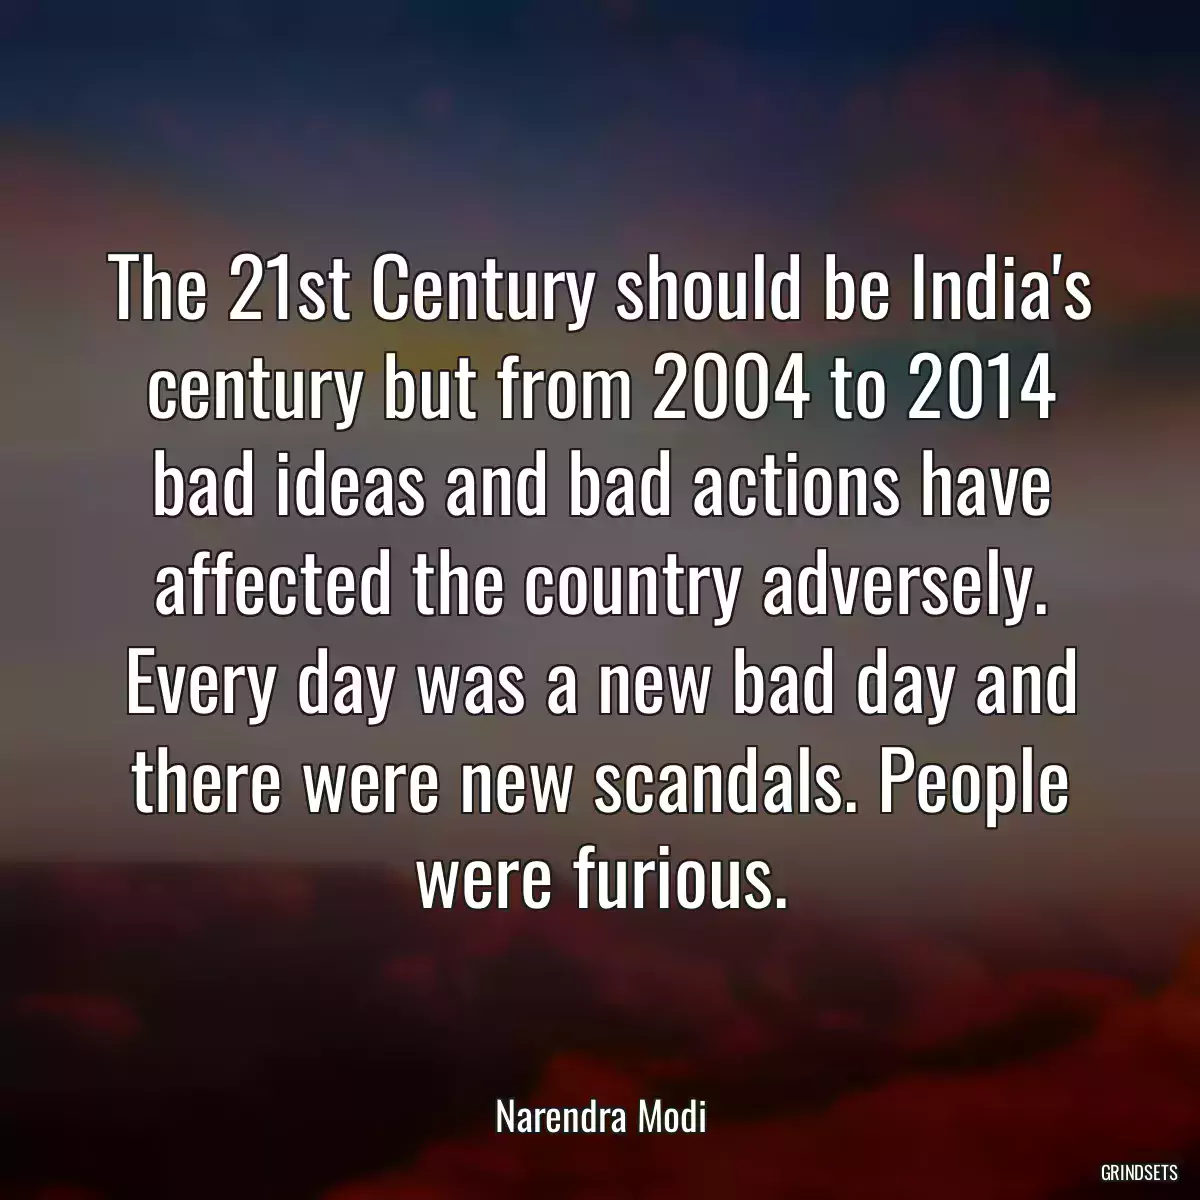 The 21st Century should be India\'s century but from 2004 to 2014 bad ideas and bad actions have affected the country adversely. Every day was a new bad day and there were new scandals. People were furious.